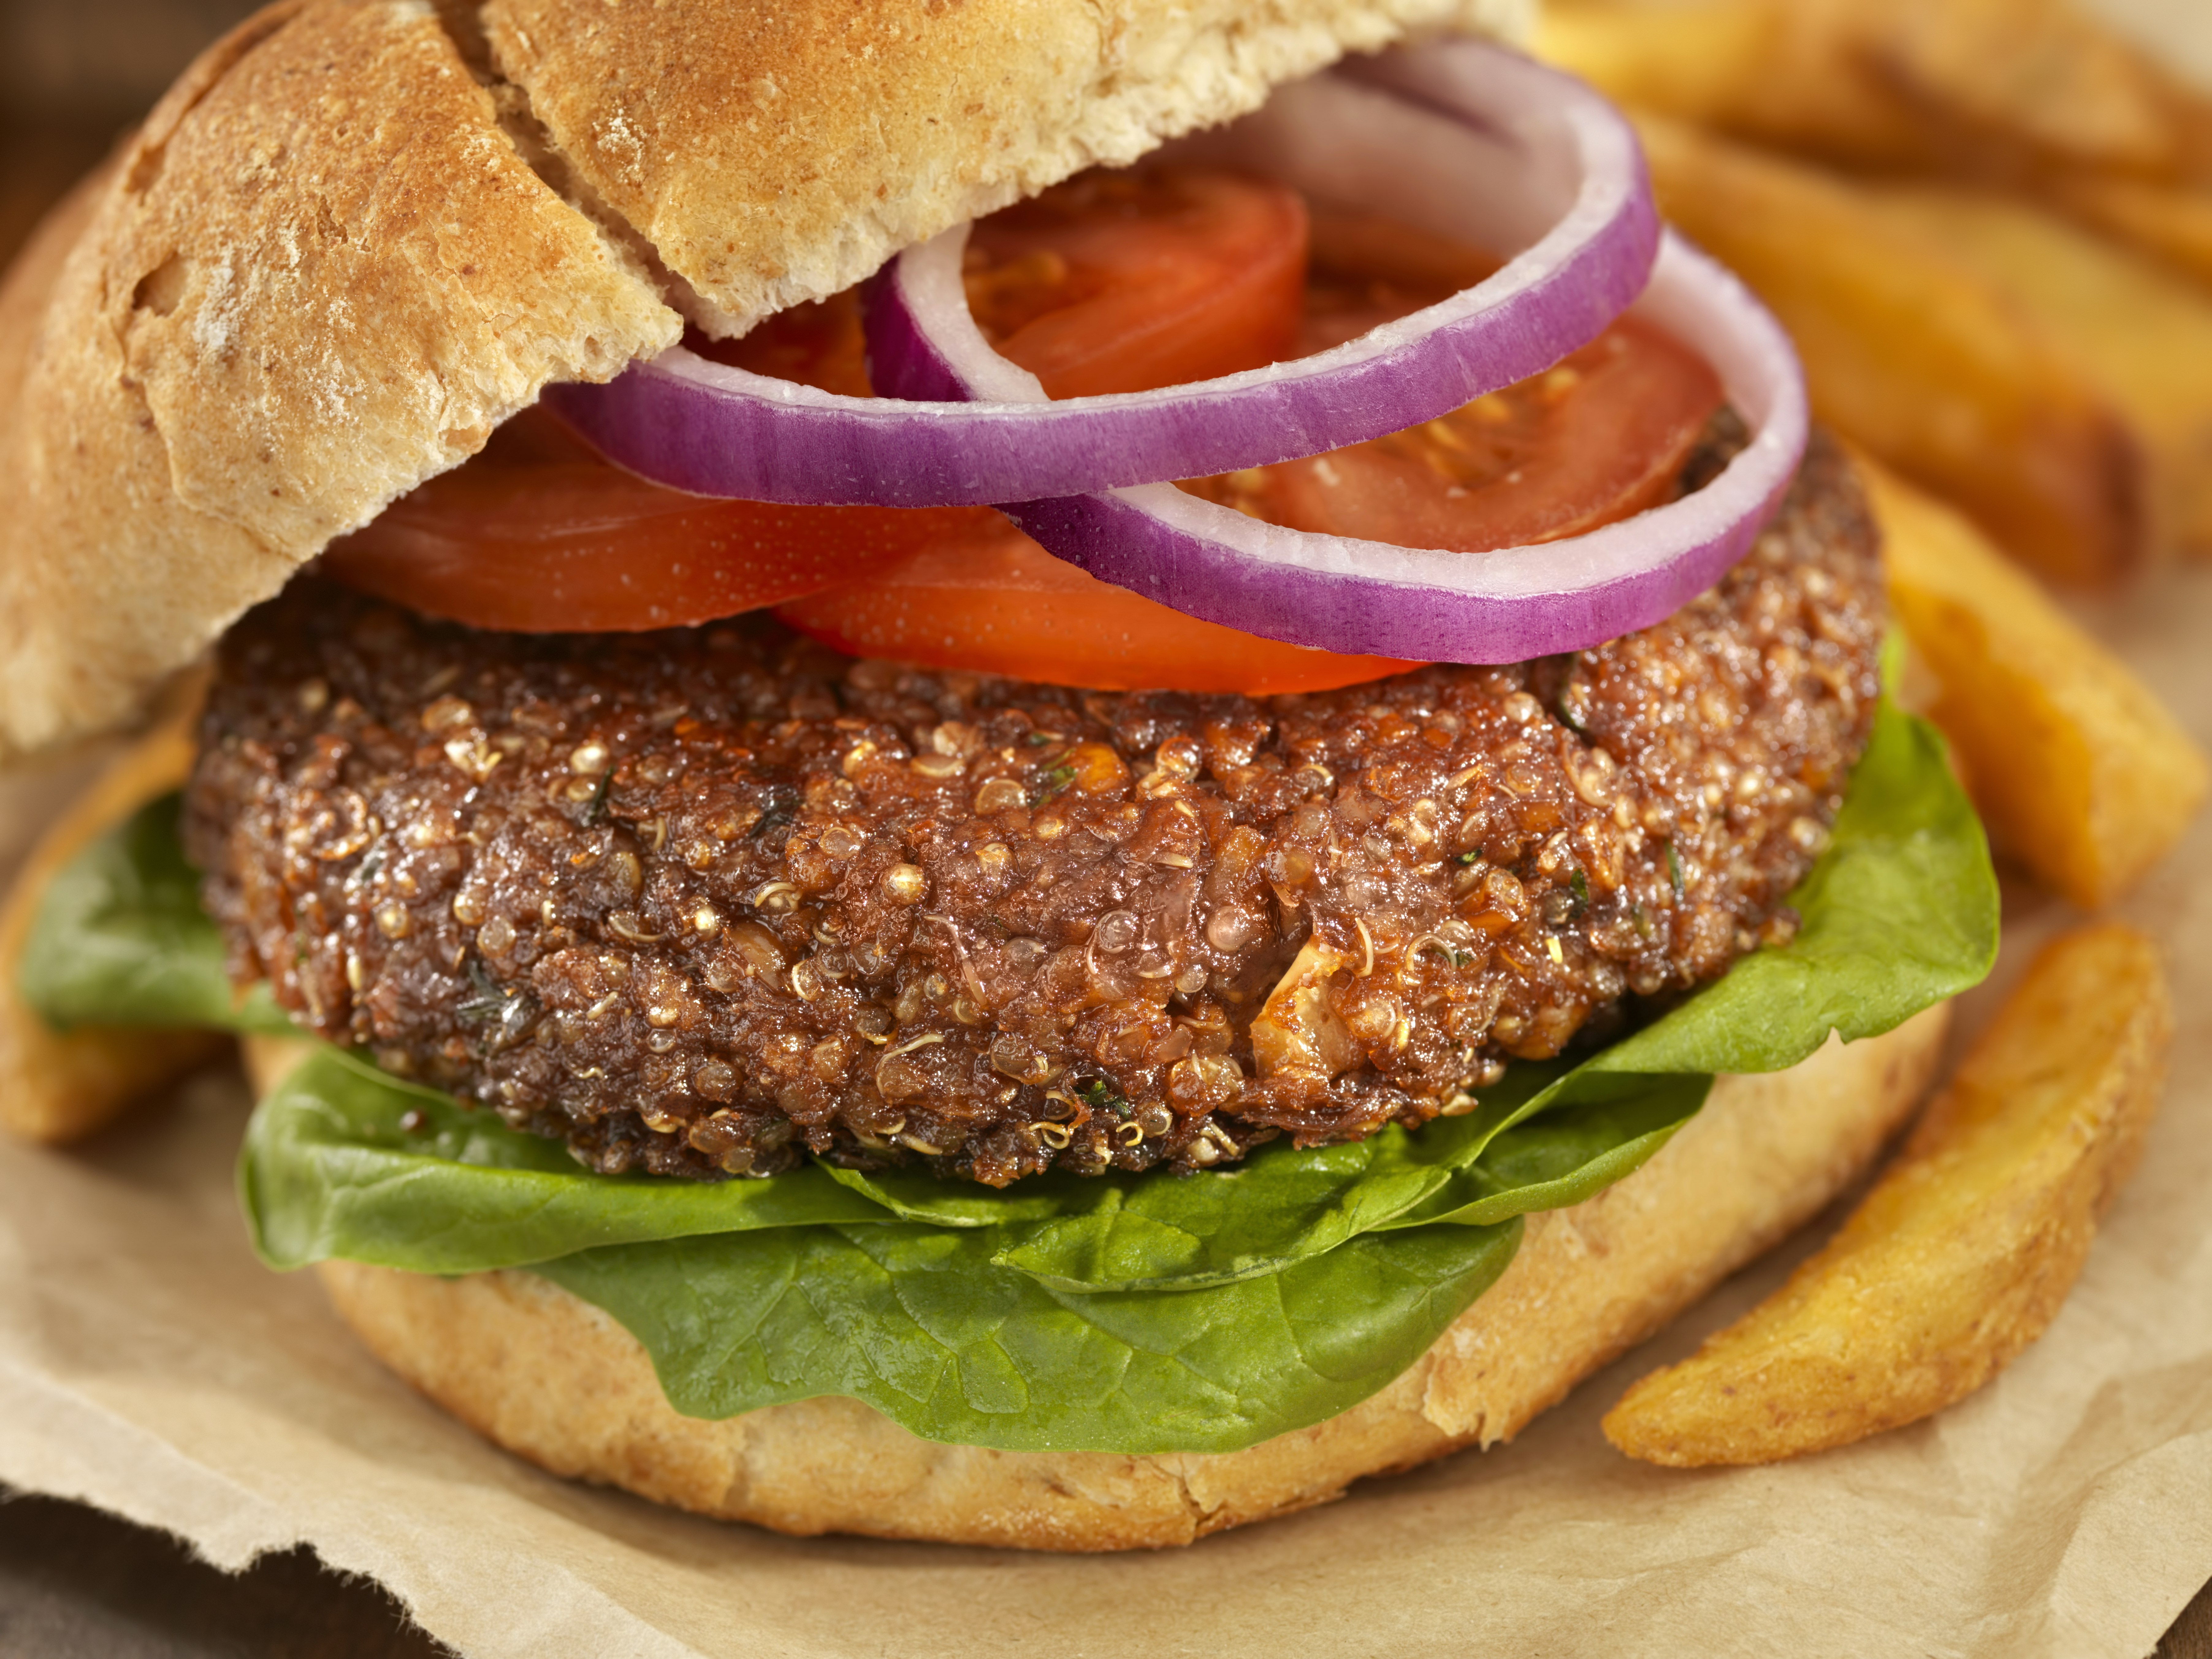 Closeup of a quinoa burger on a whole wheat bun with slices of tomato and onion on top.